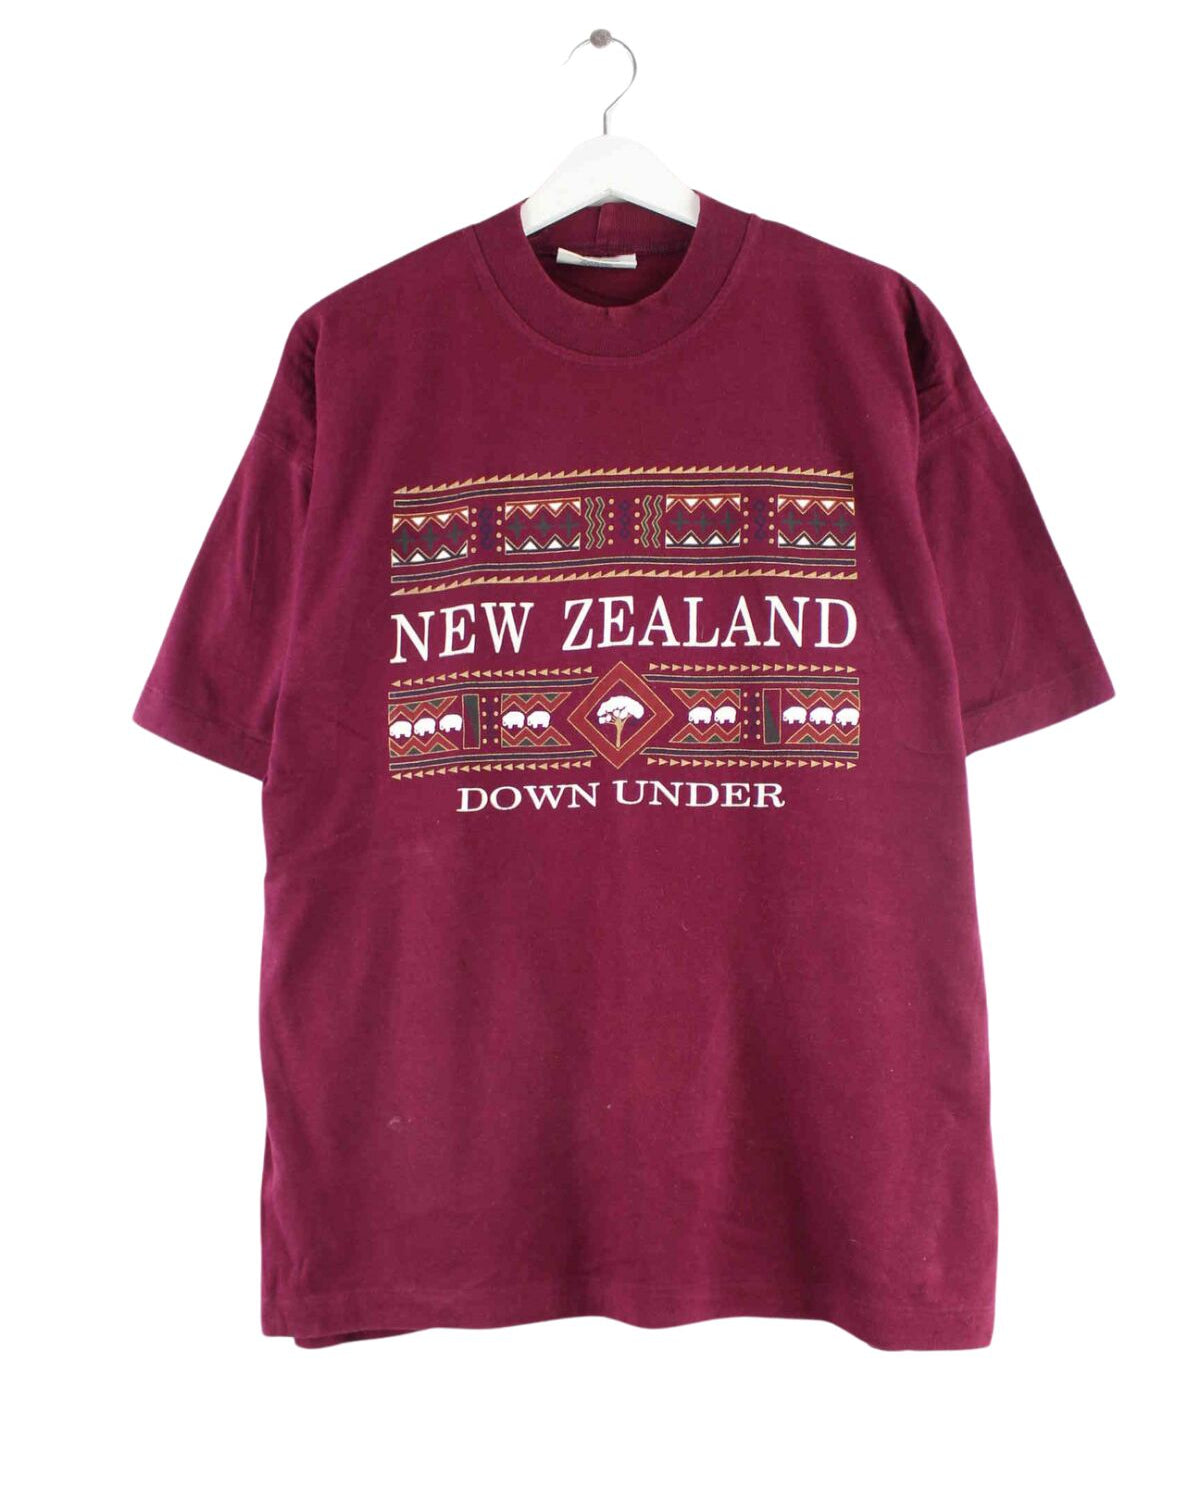 Vintage 90s New Zealand Print Single Stitched T-Shirt Rot M (front image)